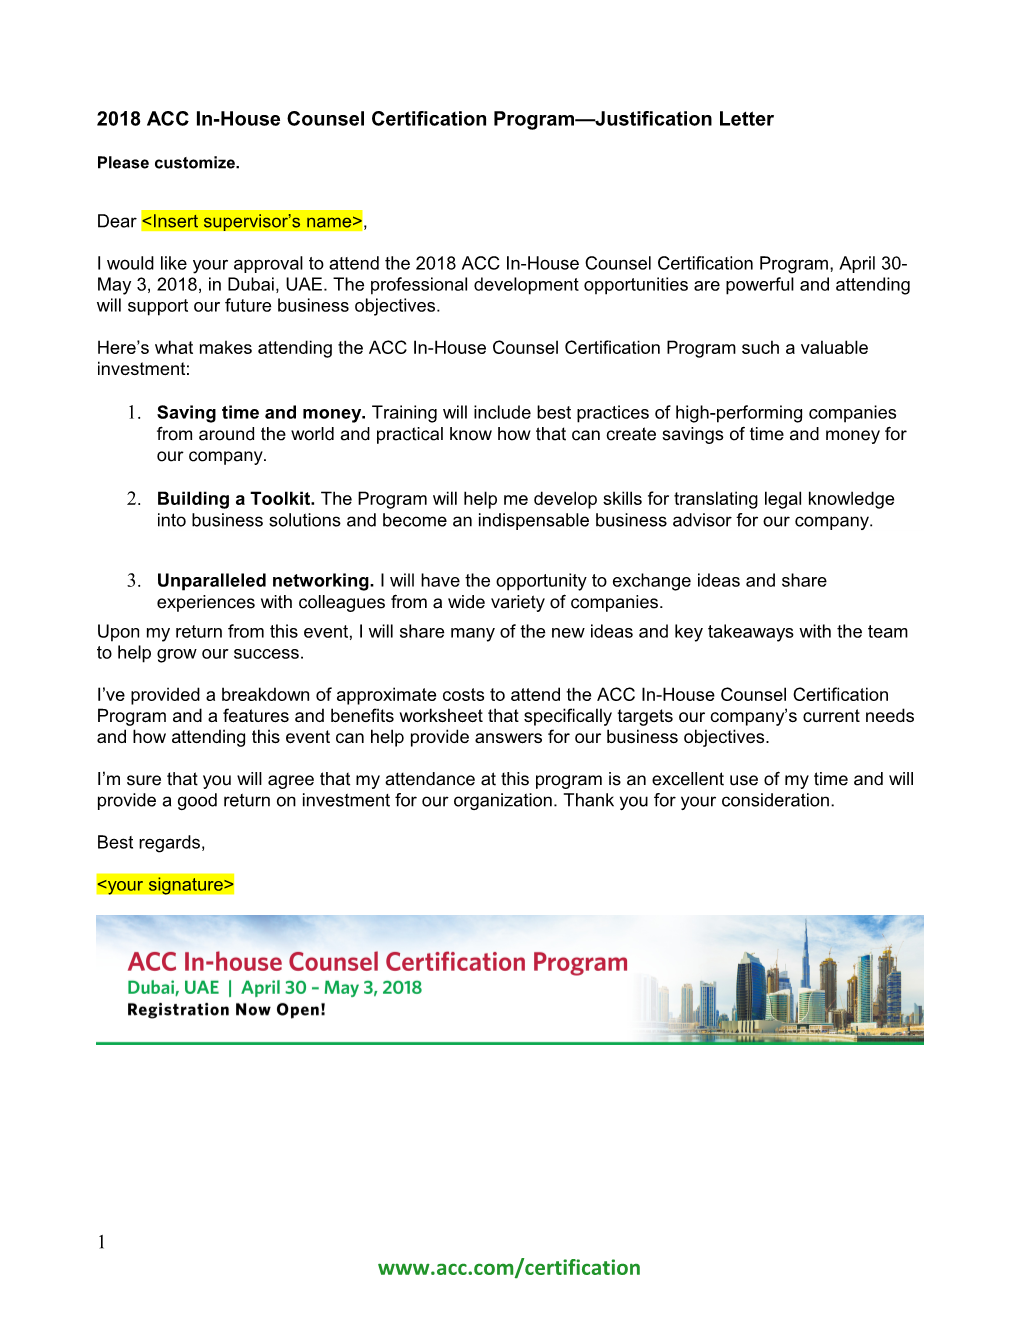 2018 ACC In-House Counsel Certification Program Justification Letter